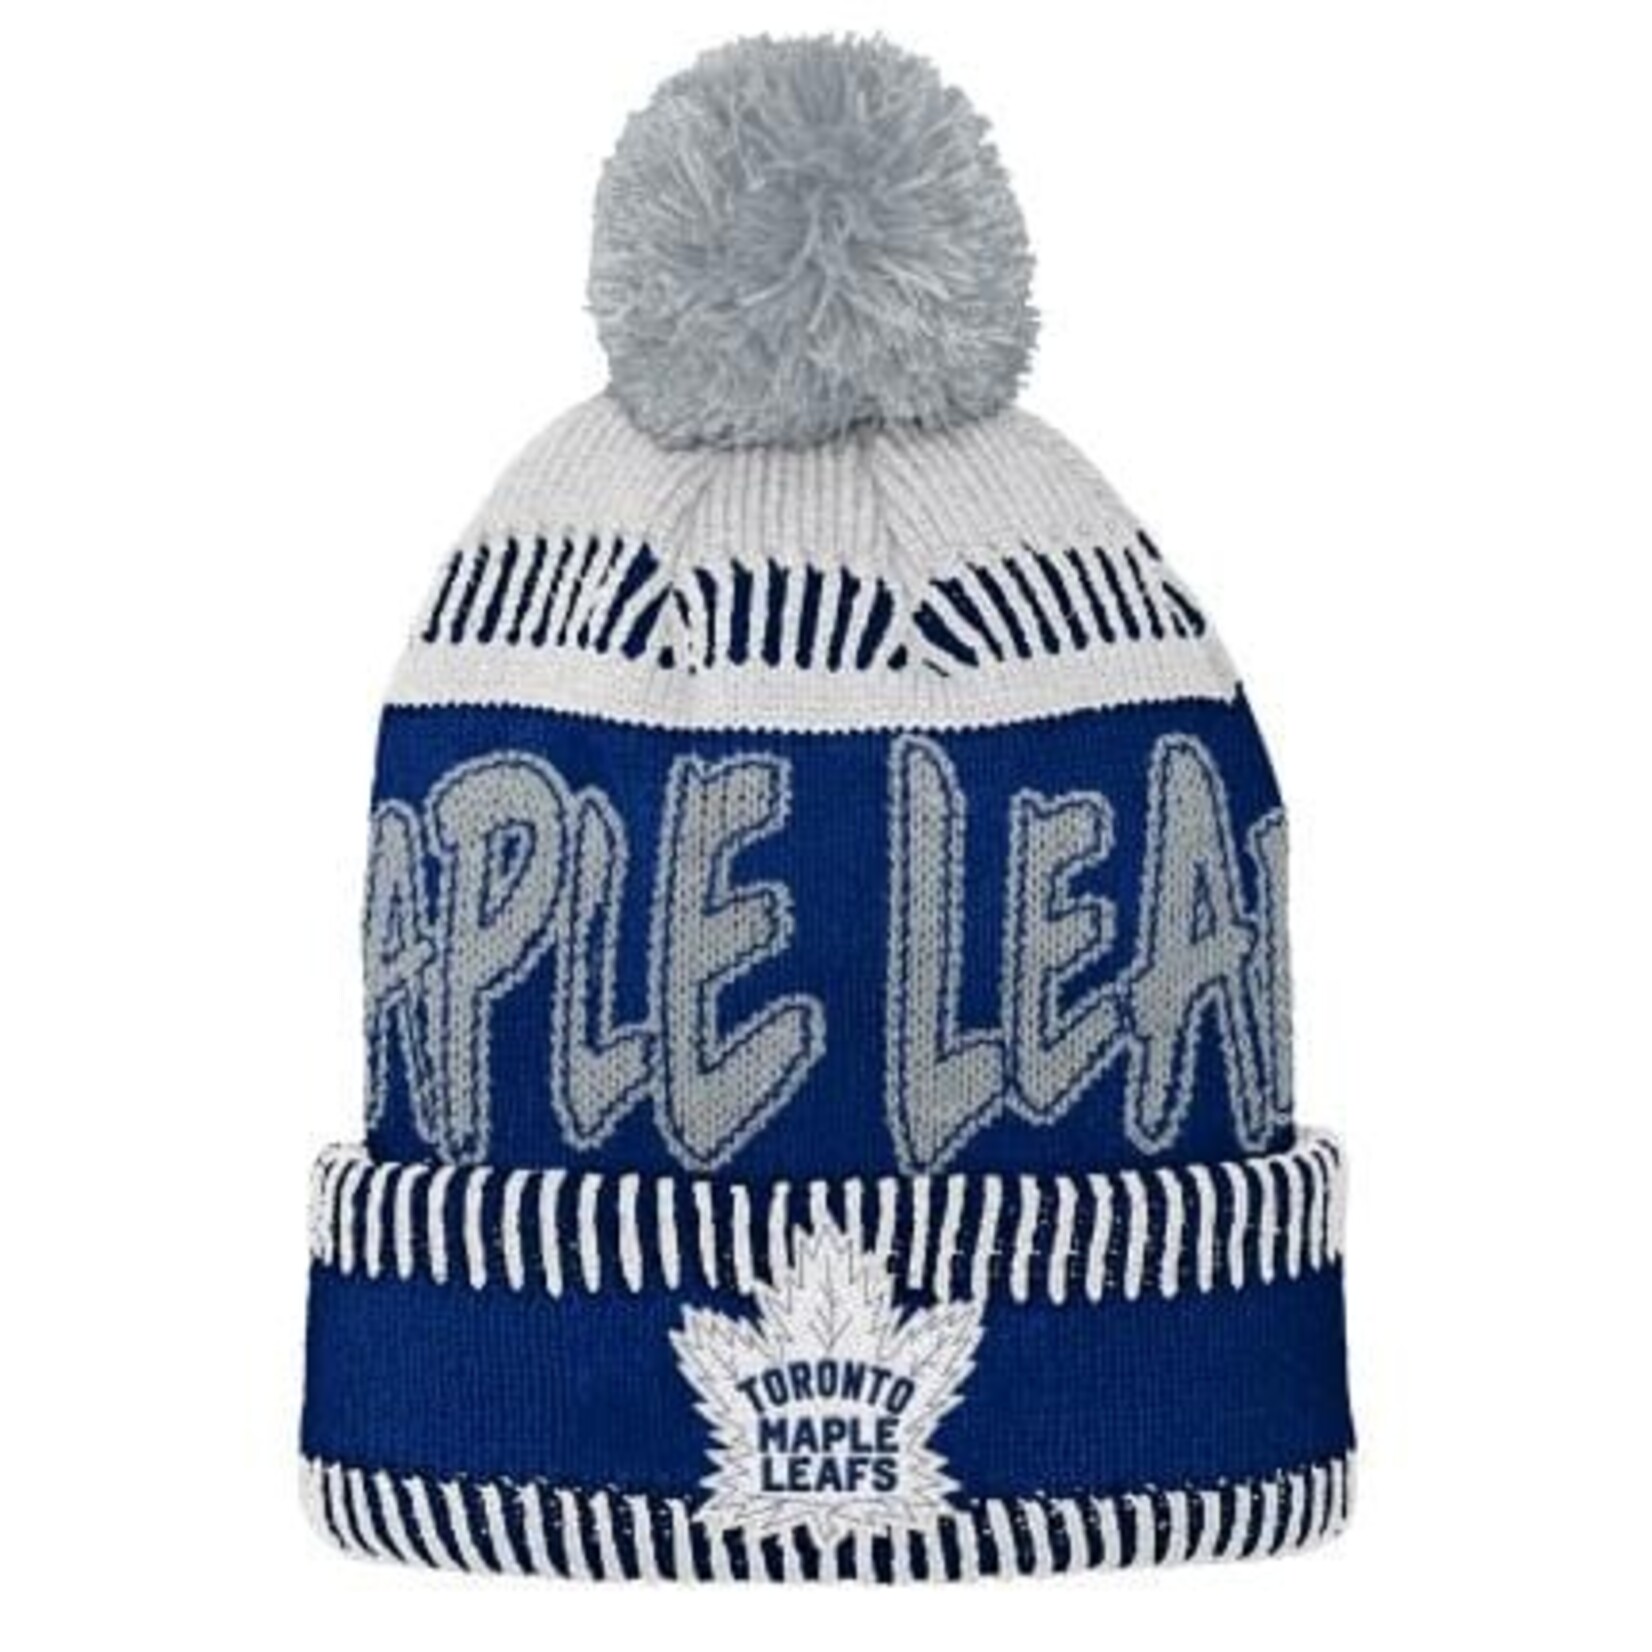 Outerstuff Outerstuff Toque, Script Cuffed Knit Pom, NHL, Toronto Maple Leafs, Youth